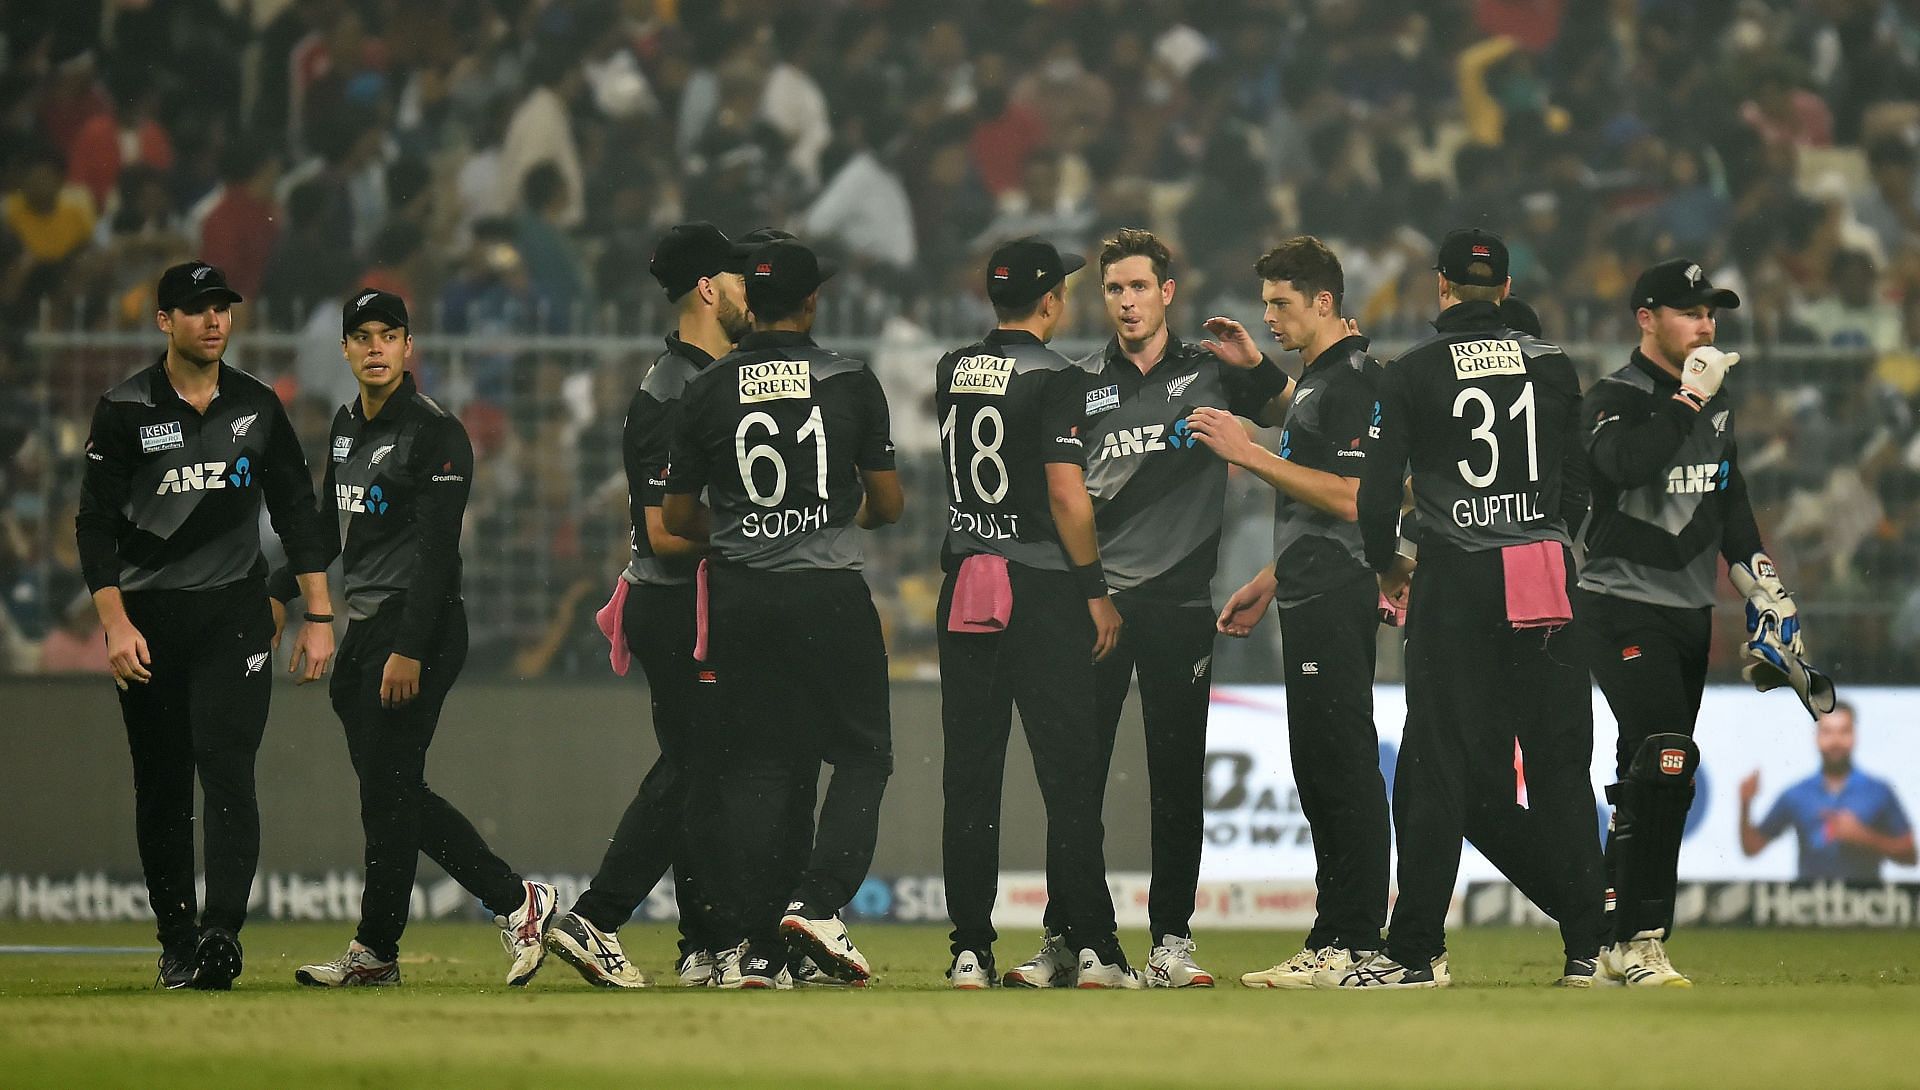 New Zealand cricket team during the T20I series in India last year. Pic: Getty Images